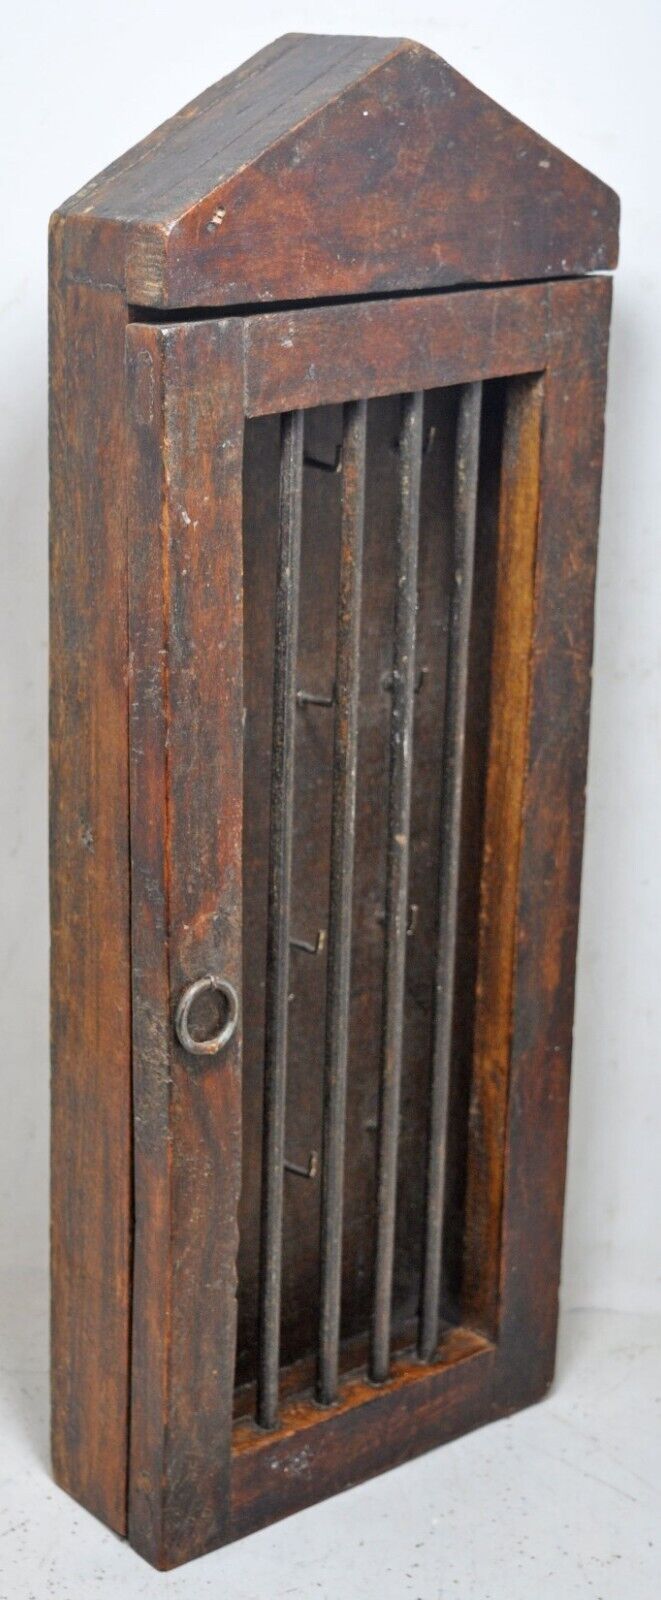 Vintage Wooden Tall Wall Hanging Key Cabinet Box Original Old Hand Crafted